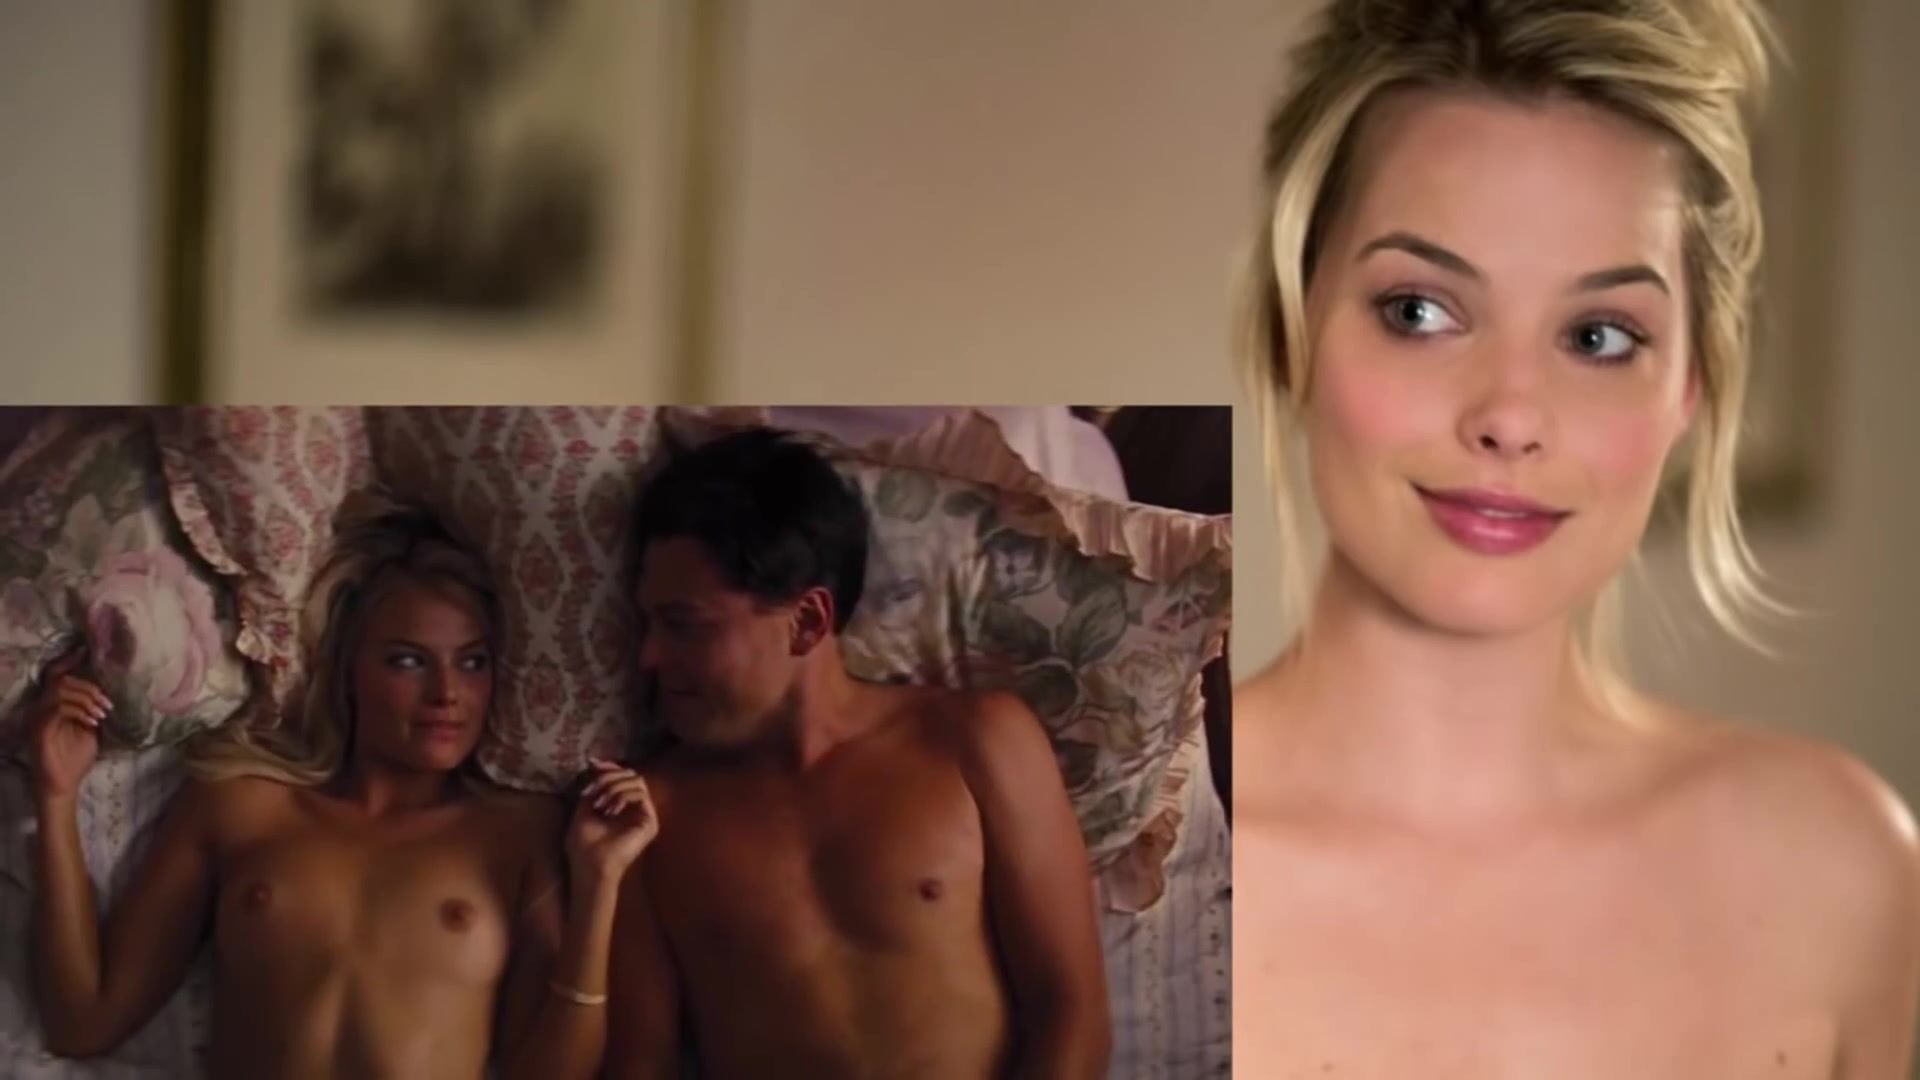 Modern actresses with full nude sex scenes